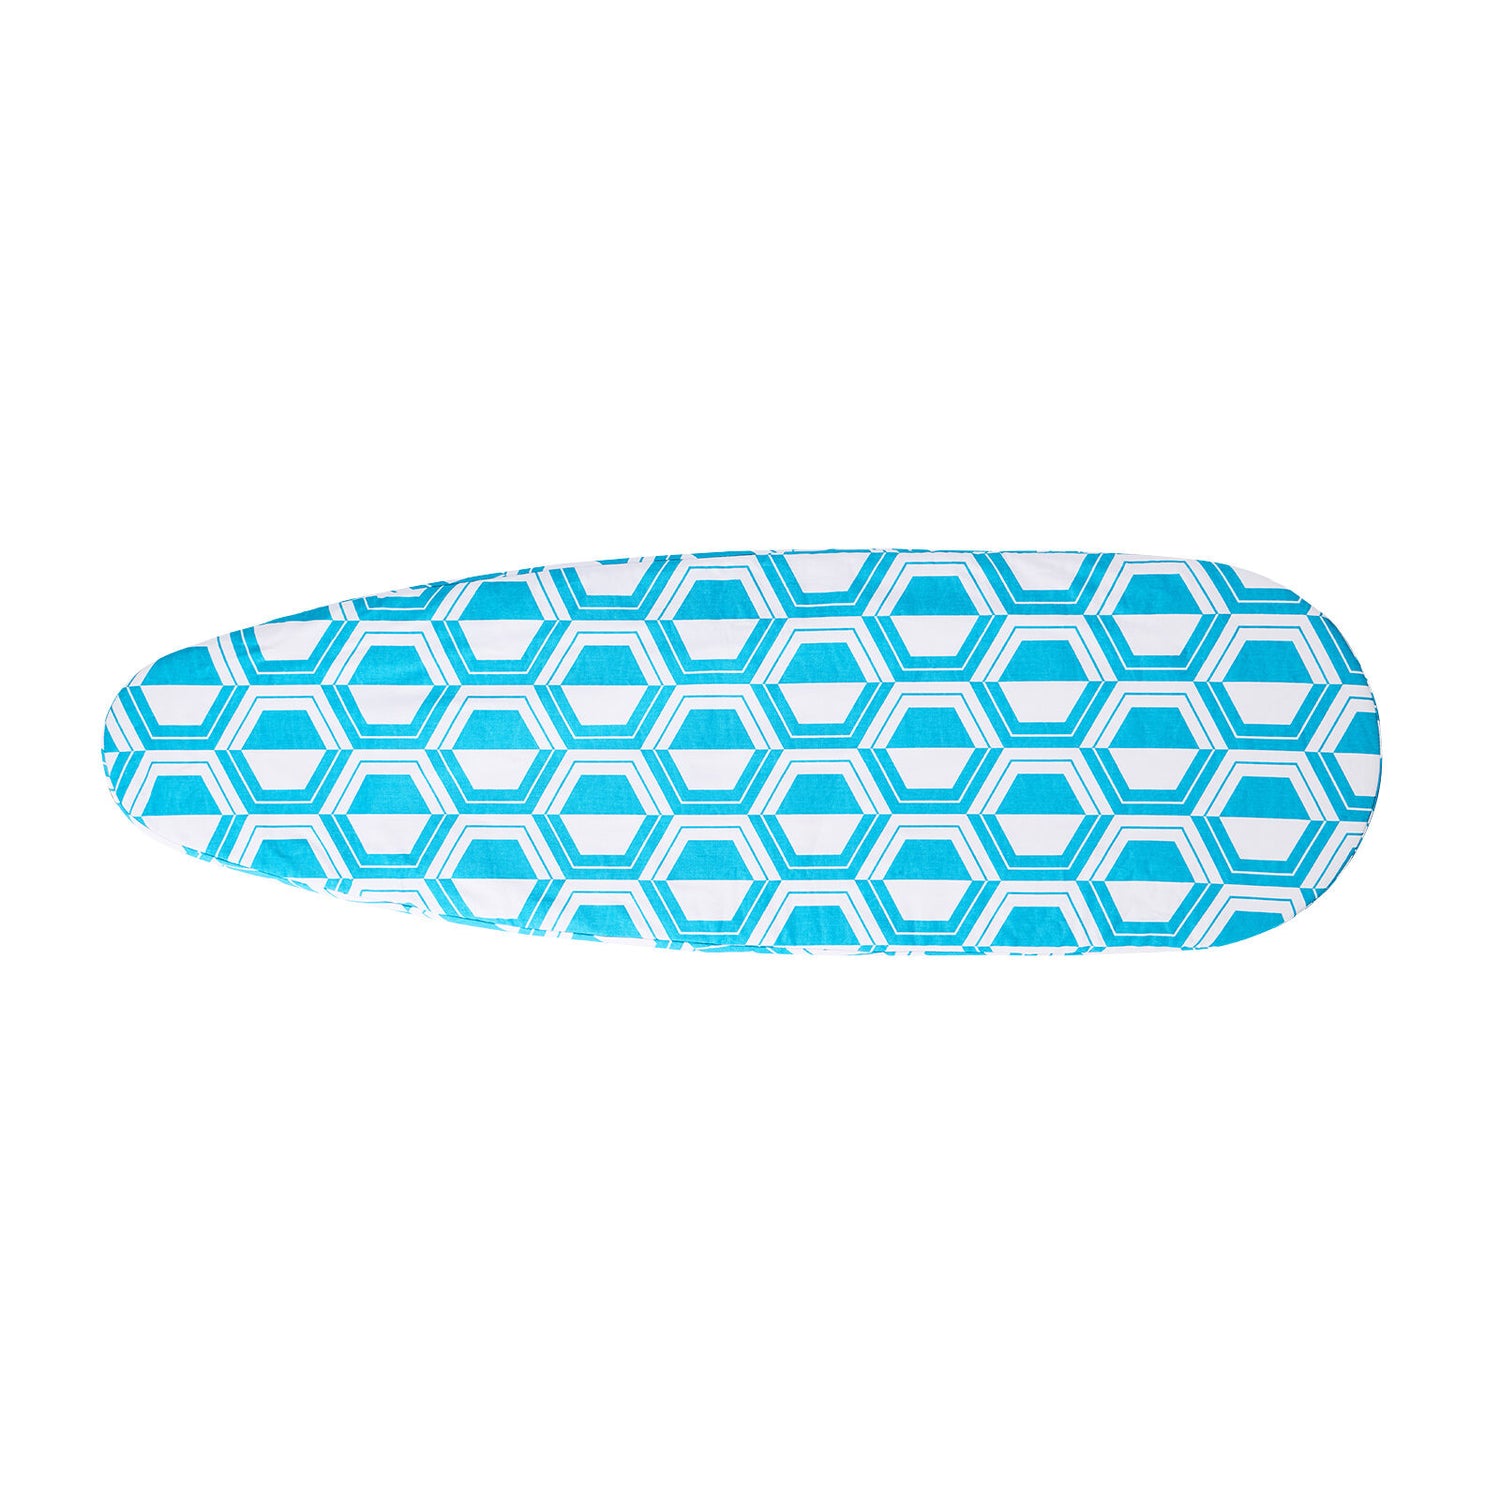 Hills Large Ironing Board Cover